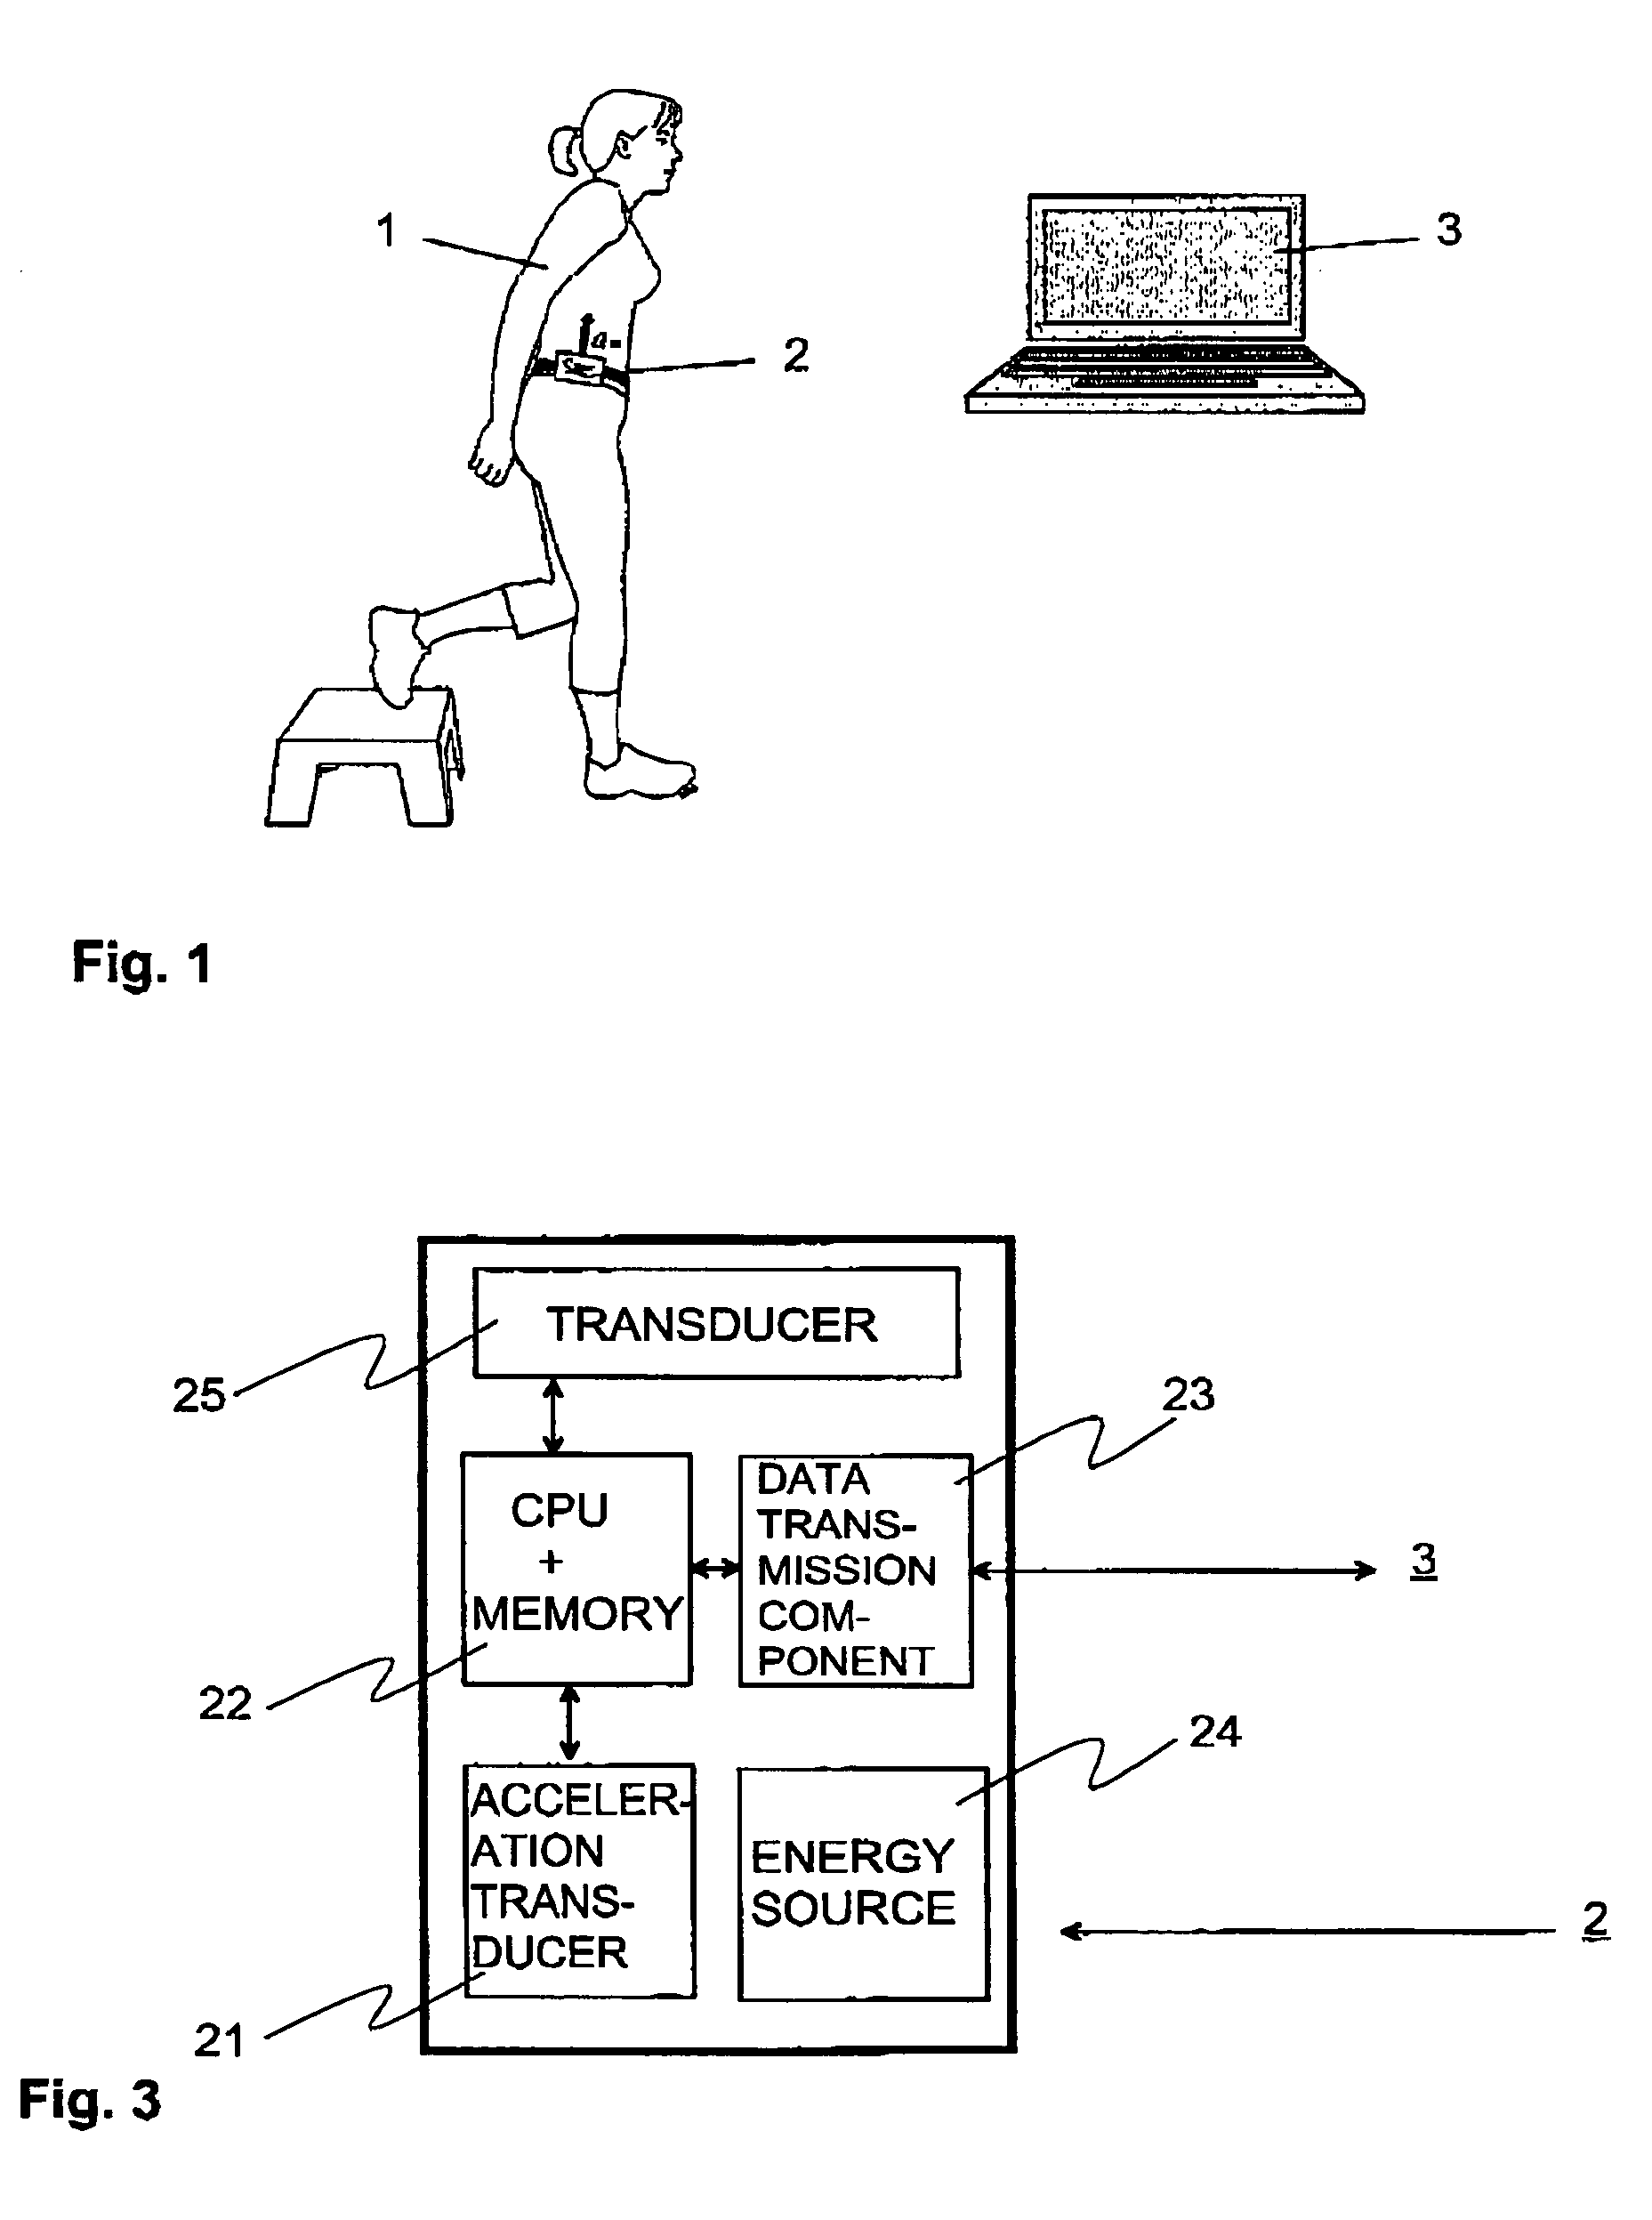 Method and device arrangement for measuring physical exercise promoting cholesterol metabolism